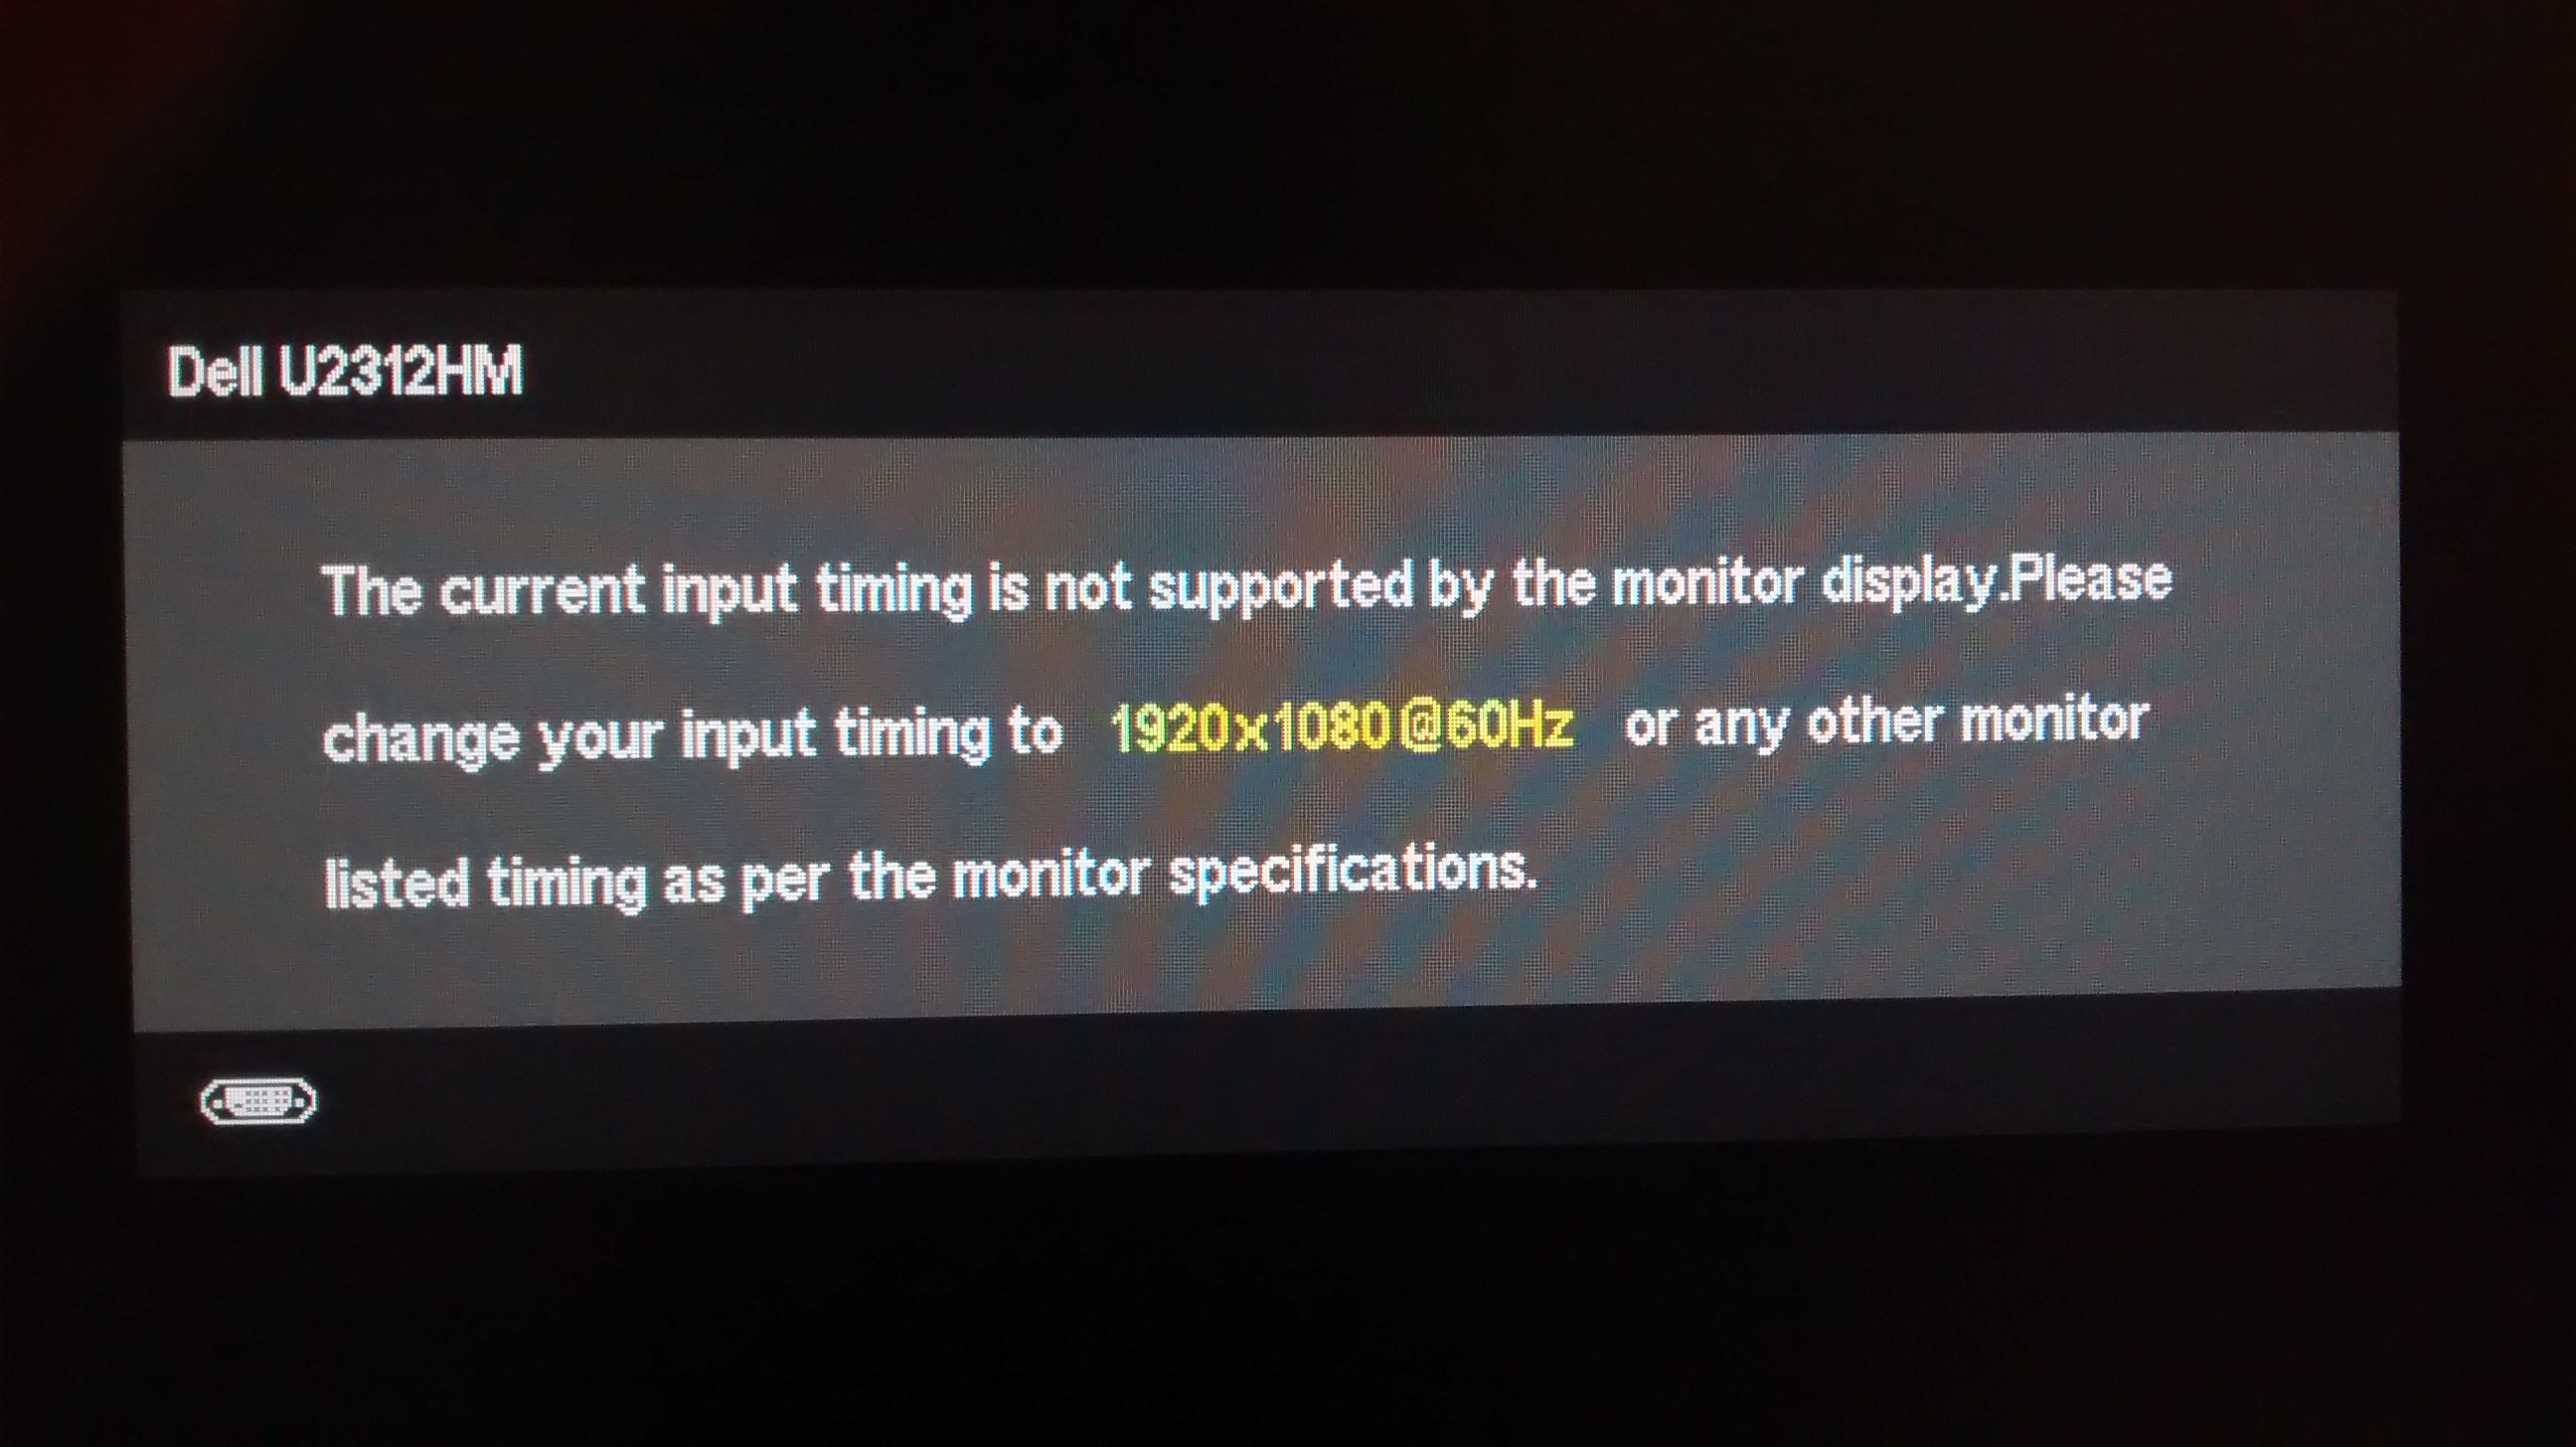 The current input timing is not supported by the monitor display